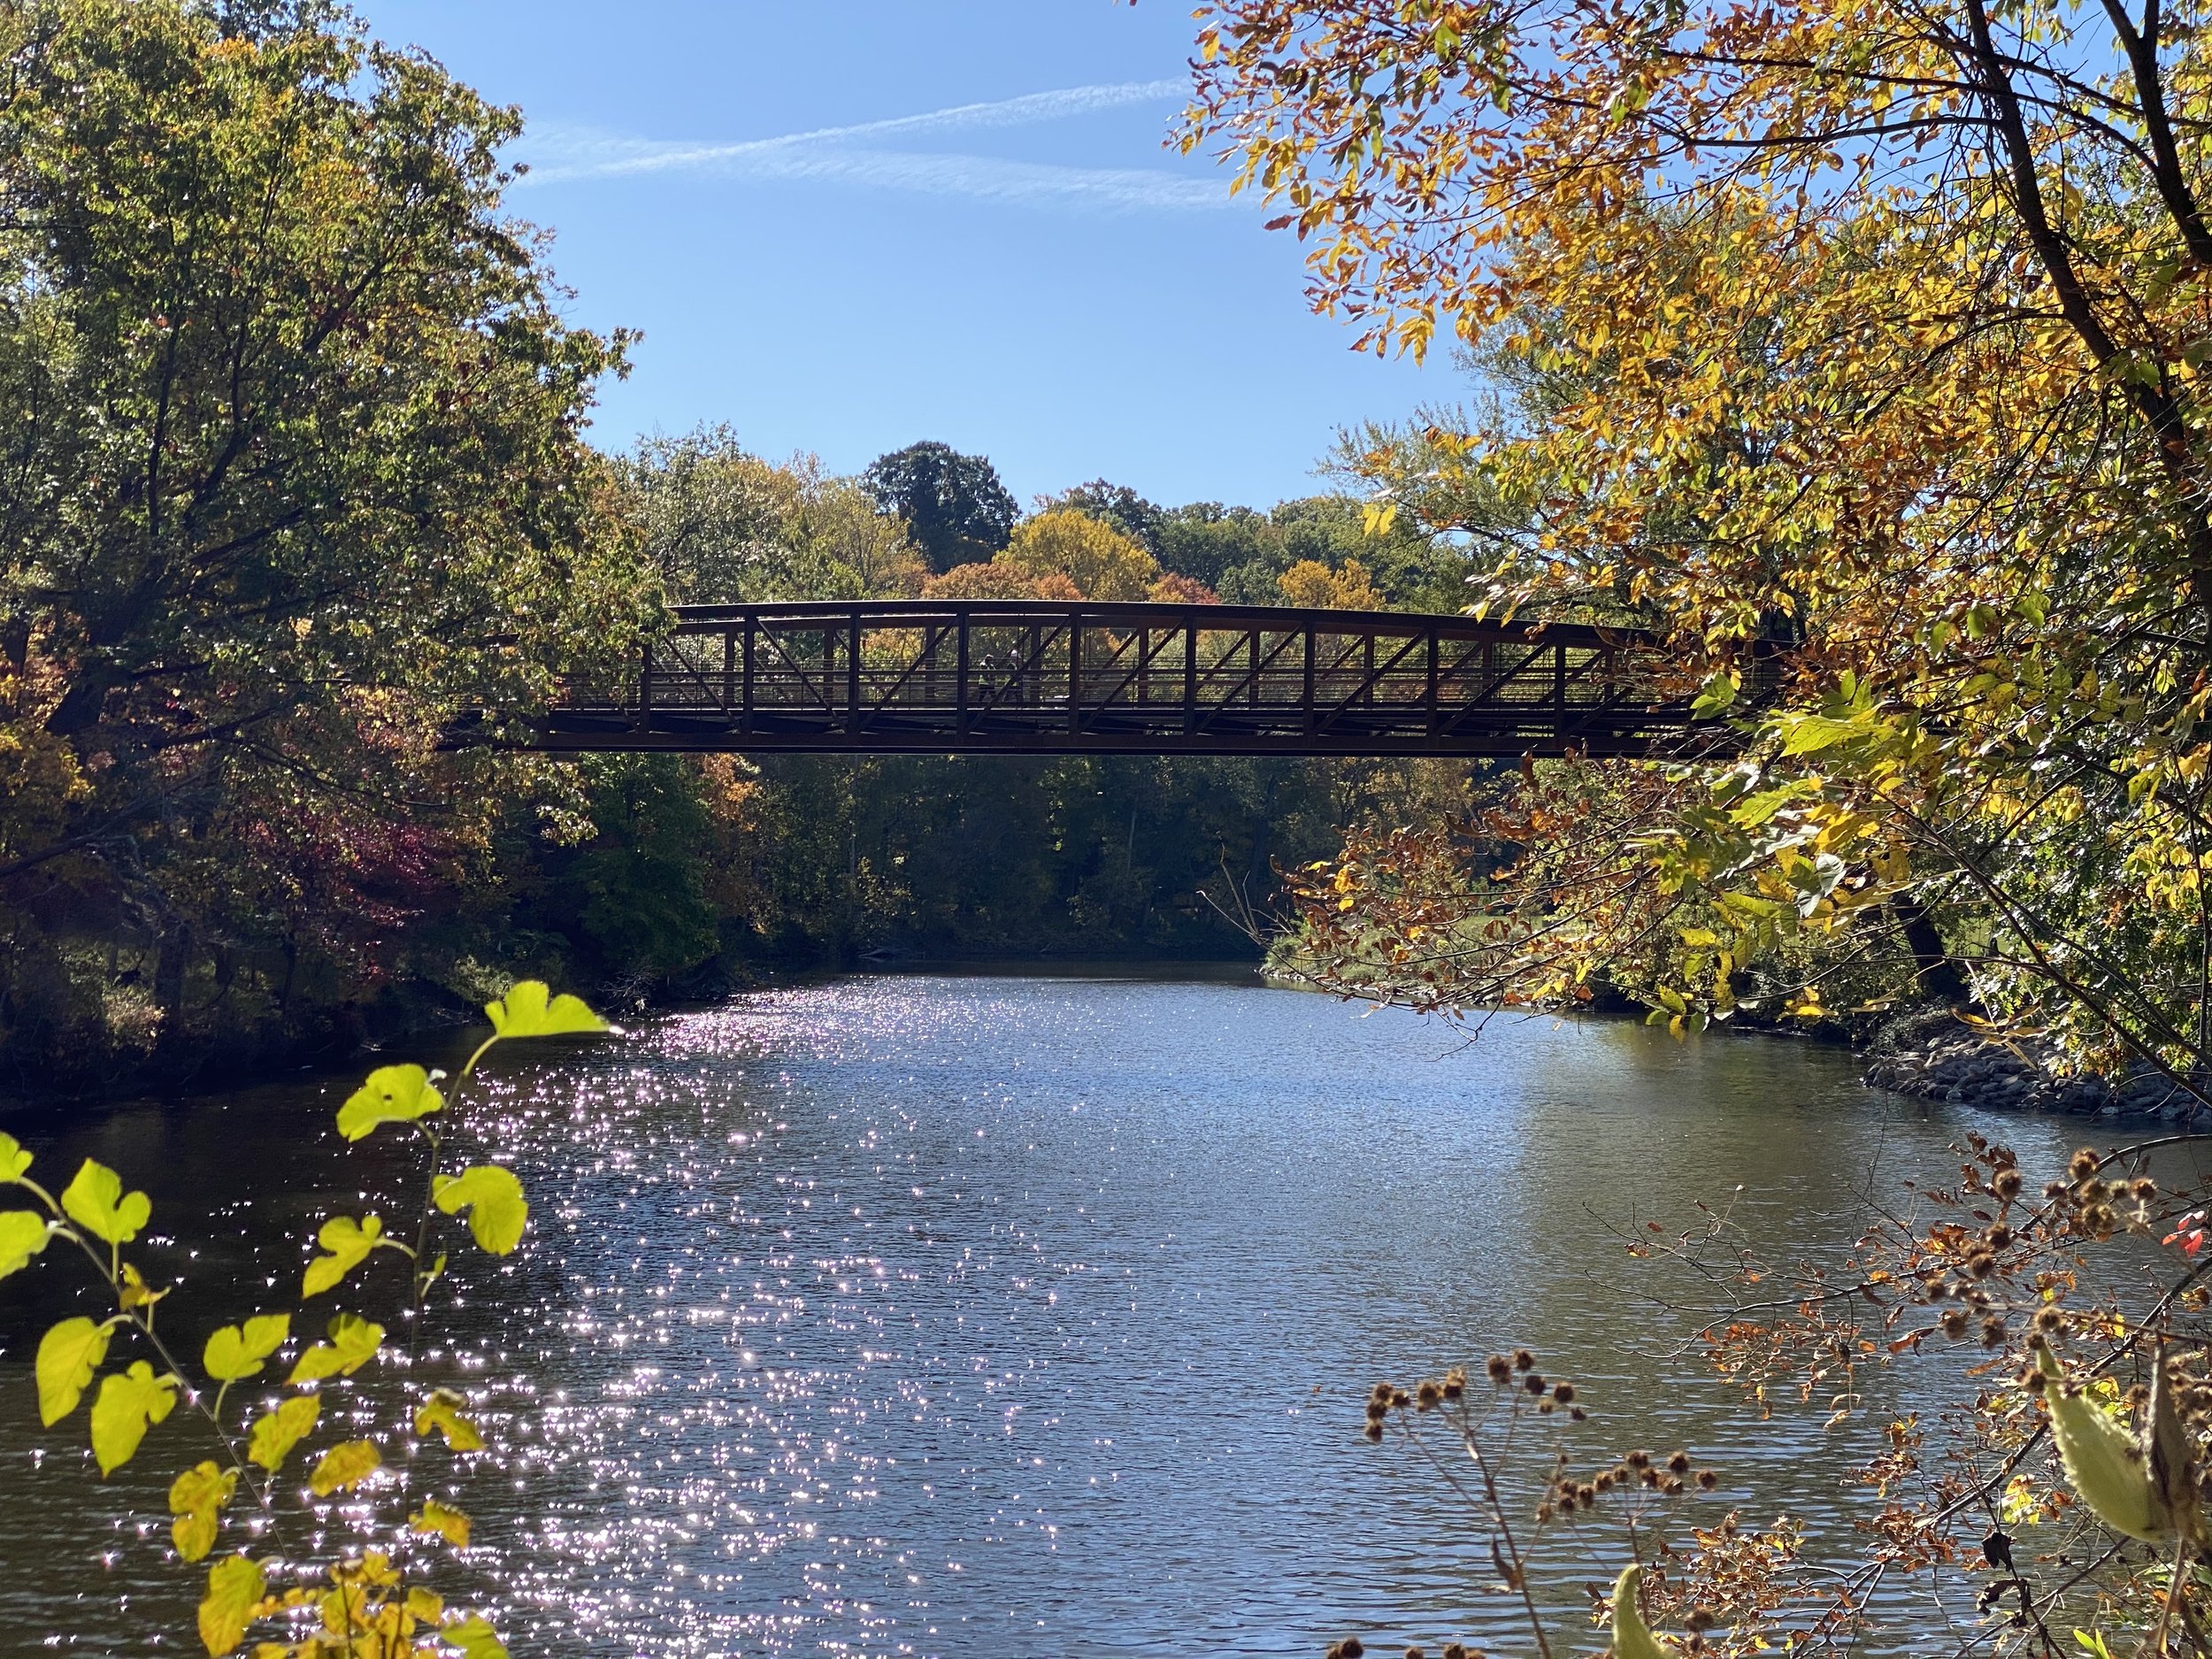 Installed in 2020, Cascade Park's newest bridge connects the main section of Cascade Park to the Elywood section